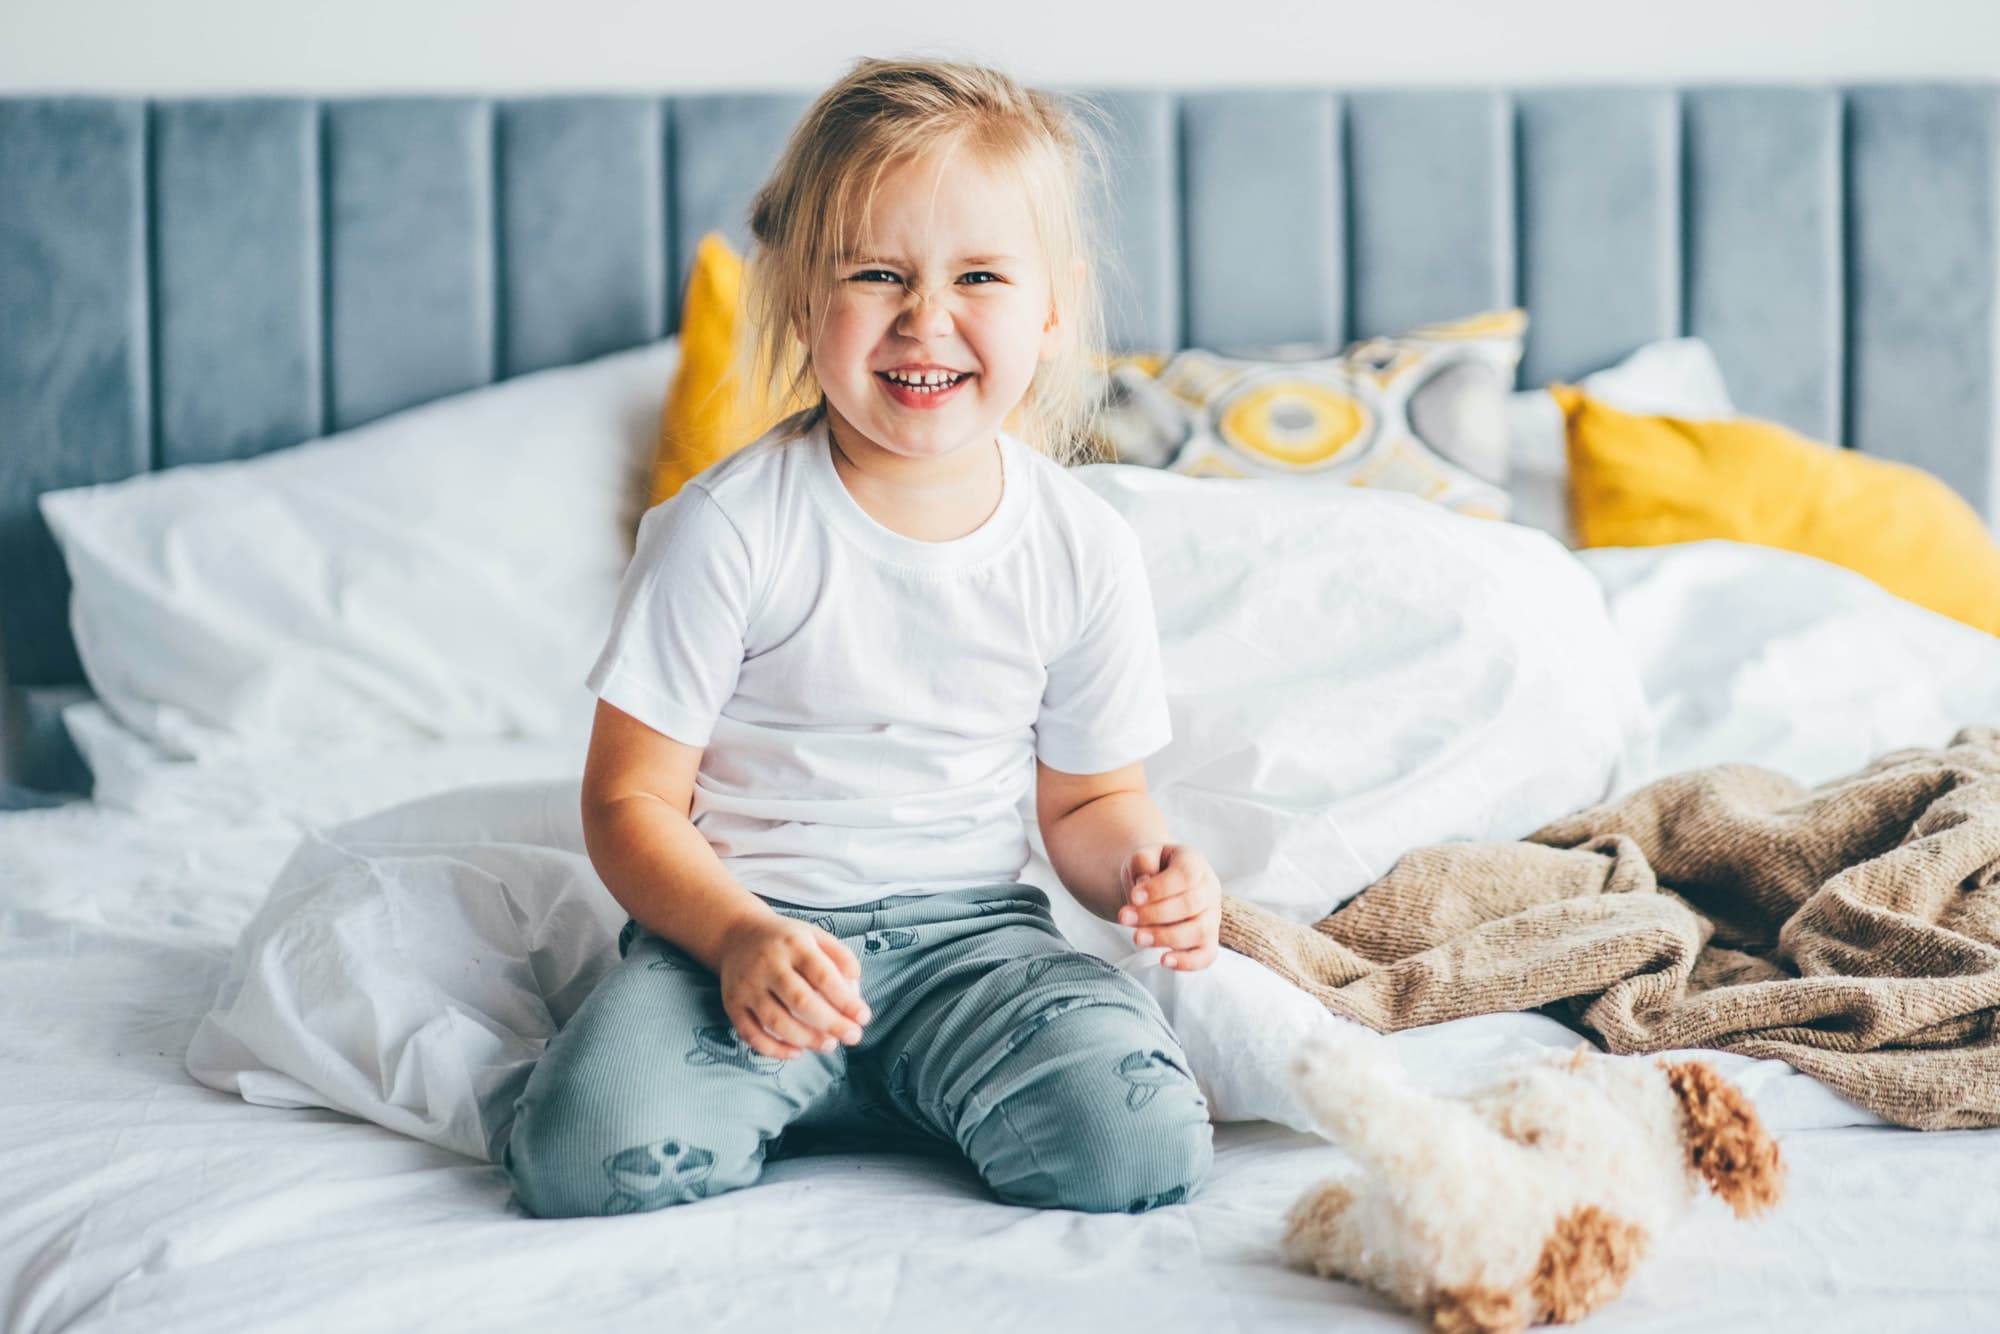 Portrait of laughing baby girl on bed.